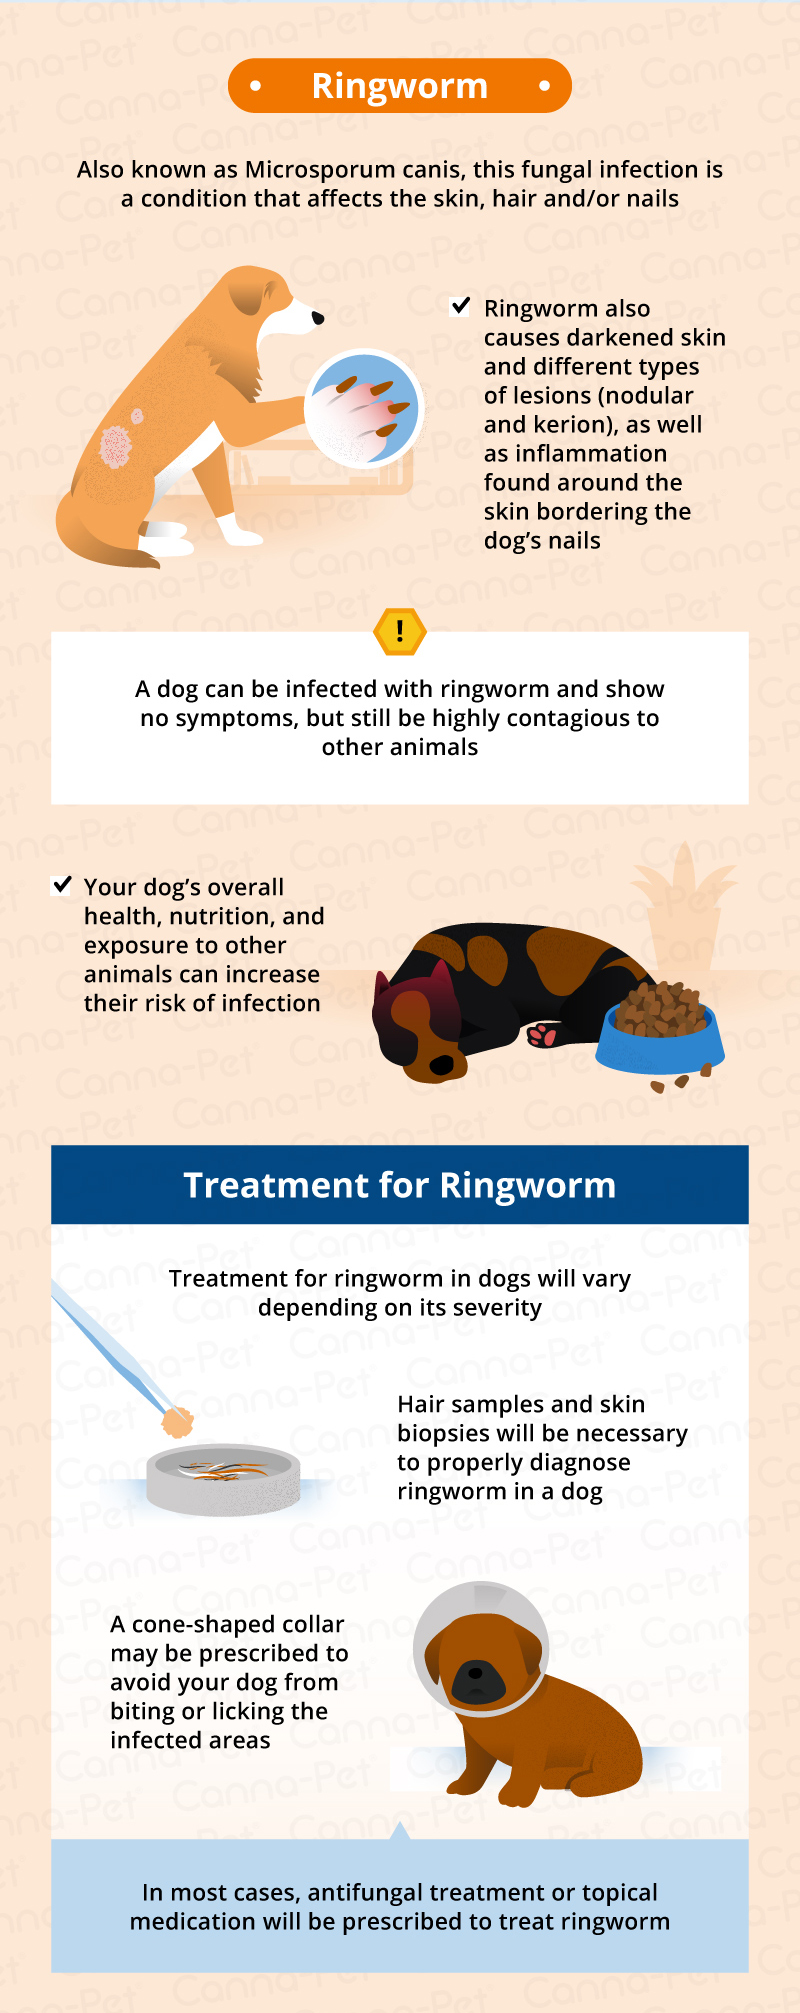 Dog Hair Loss: Common Causes & Treatment | Canna-Pet